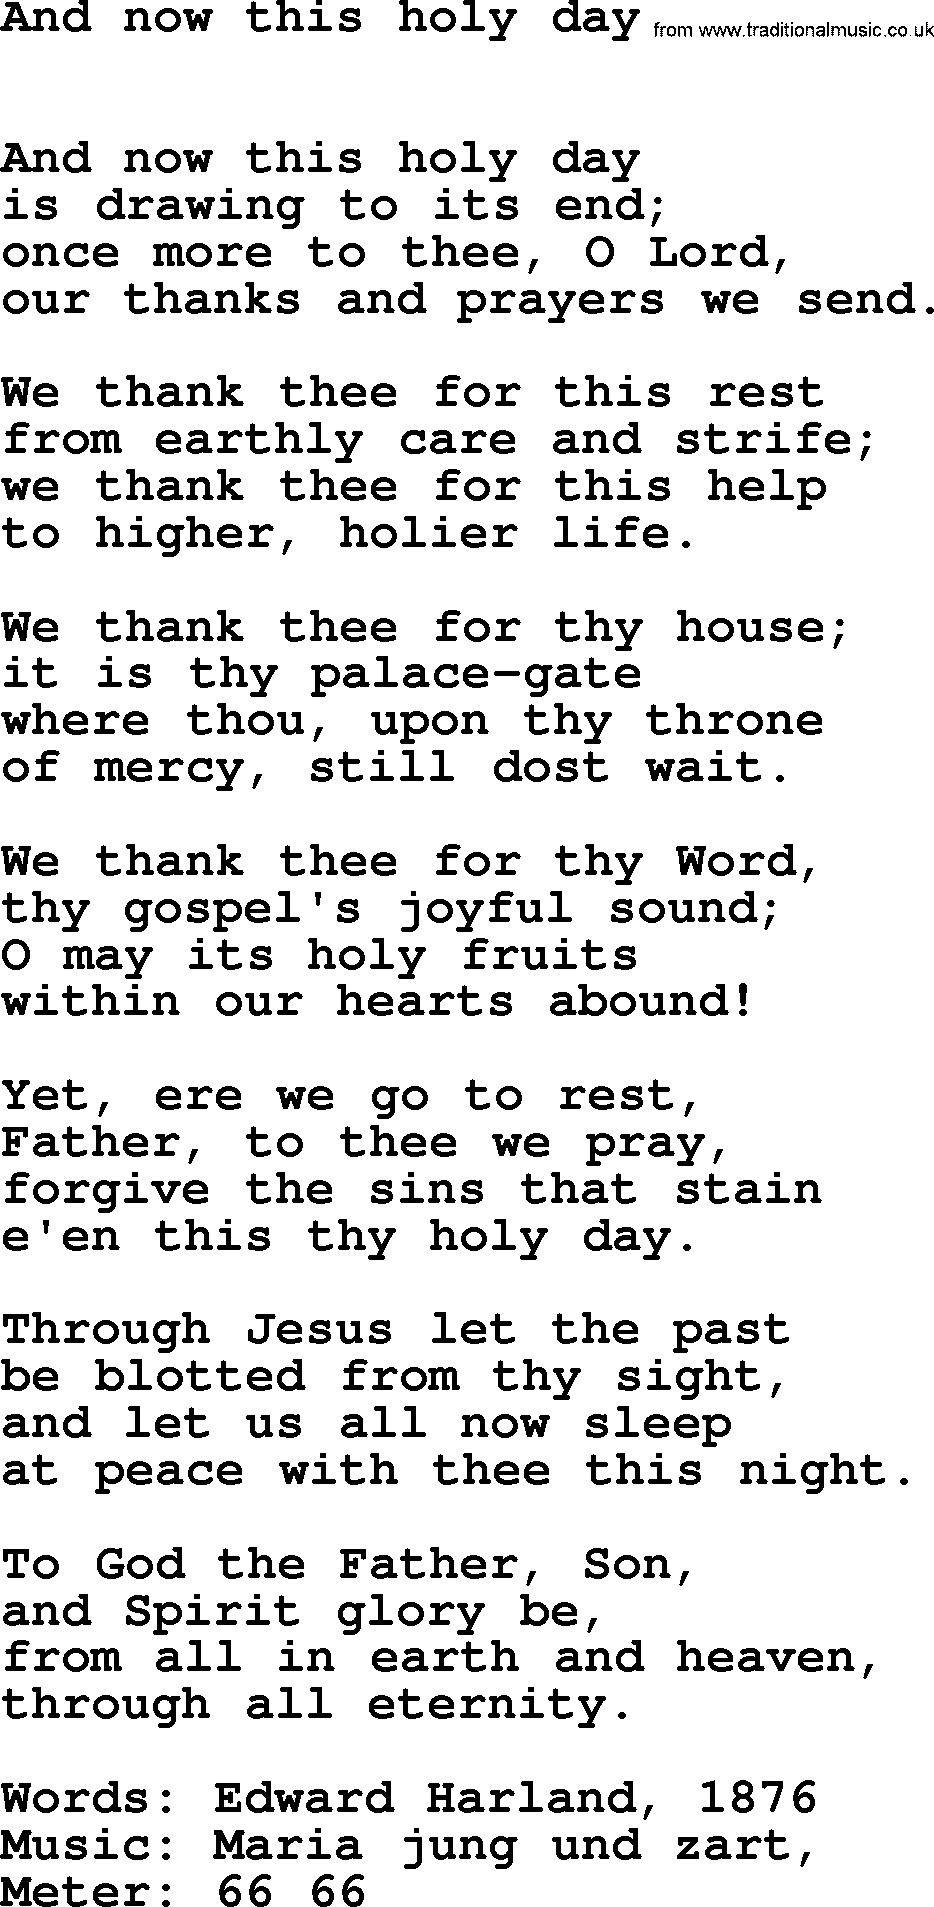 Book of Common Praise Hymn: And Now This Holy Day.txt lyrics with midi music